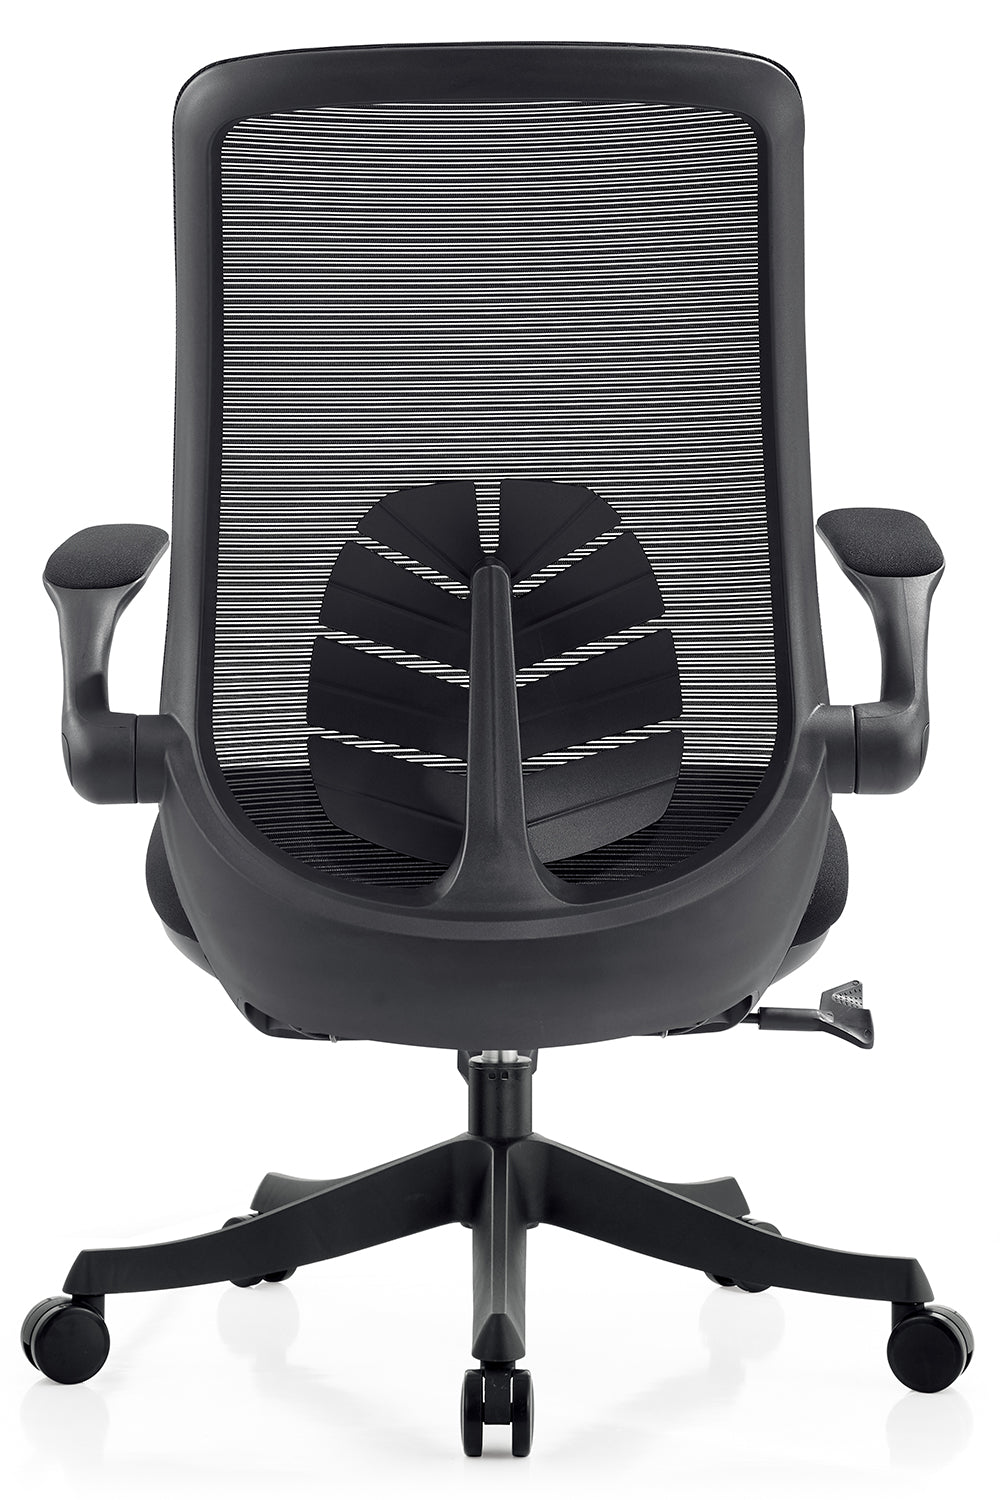 Noel Executive Mid Back Office Chair with Nylon Base - Black